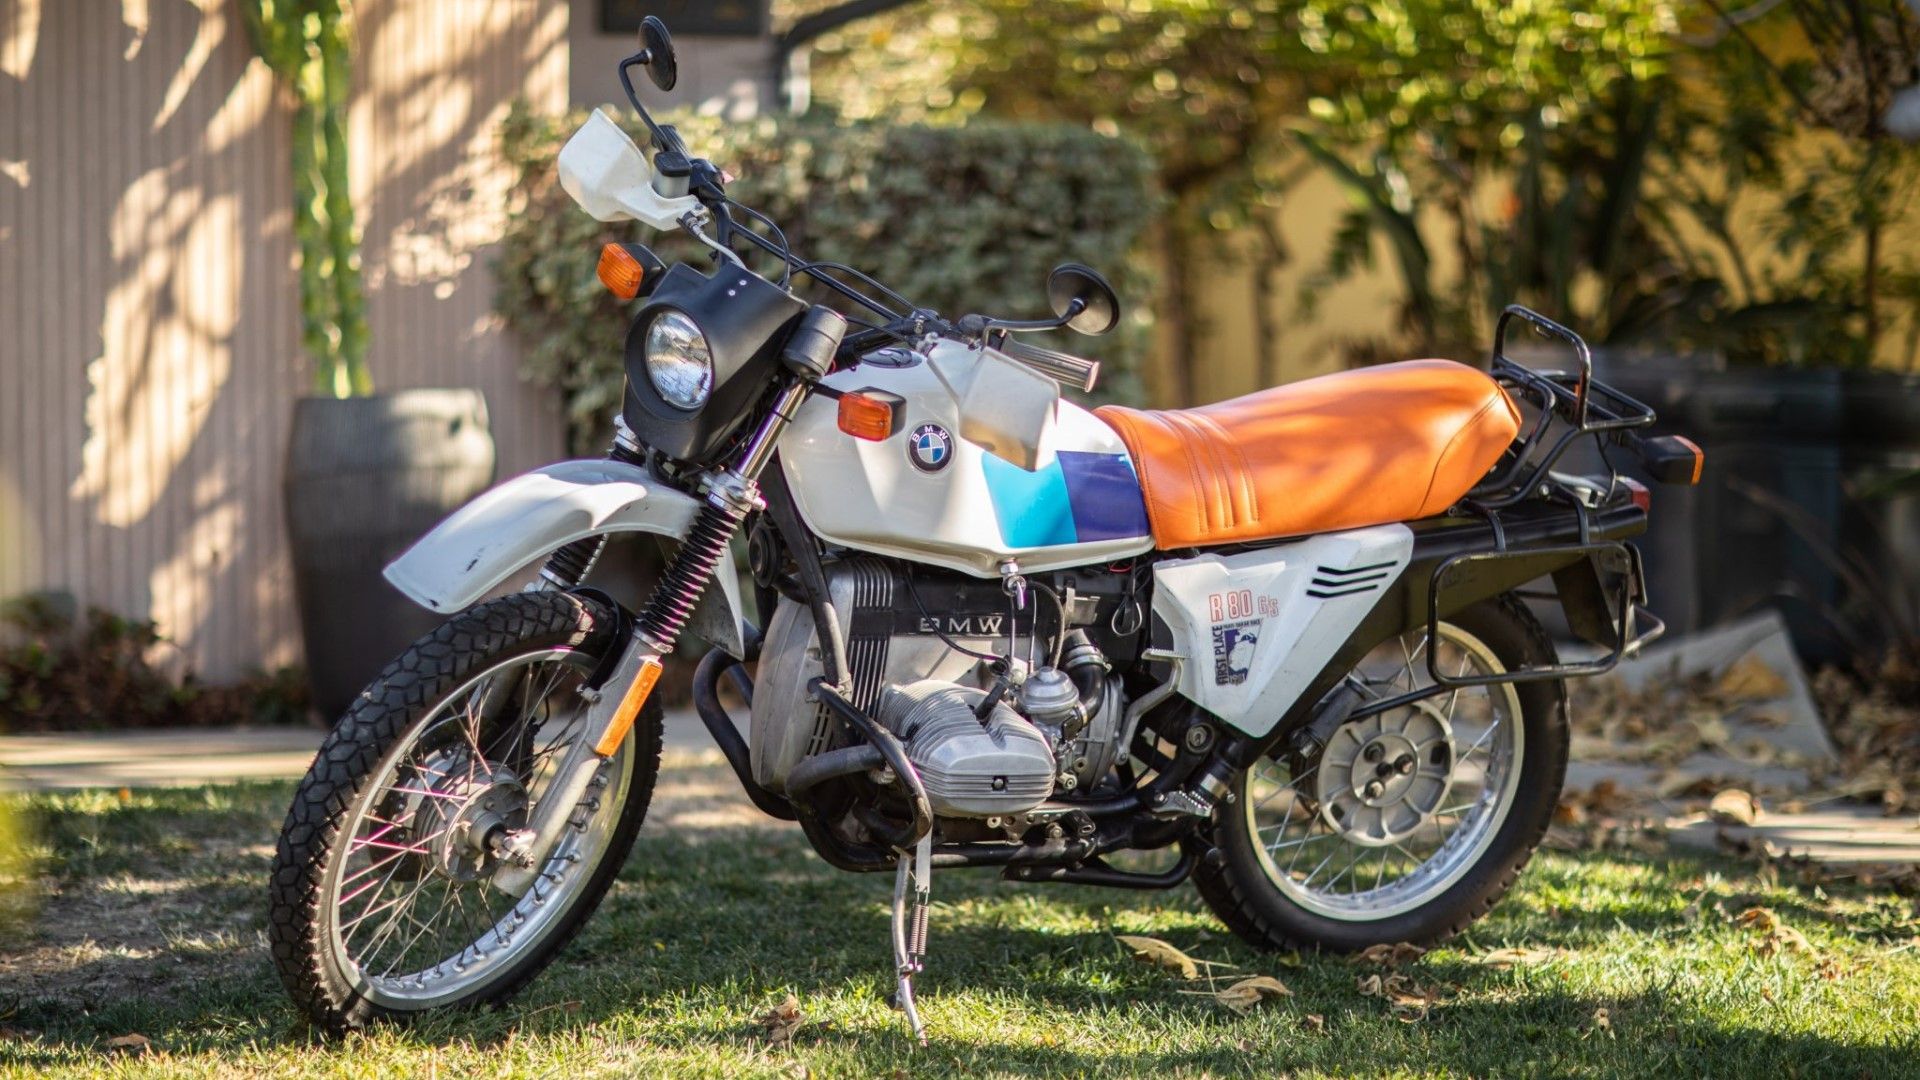 10 Classic Adventure Motorcycles Built For A Lifetime Of Adventure